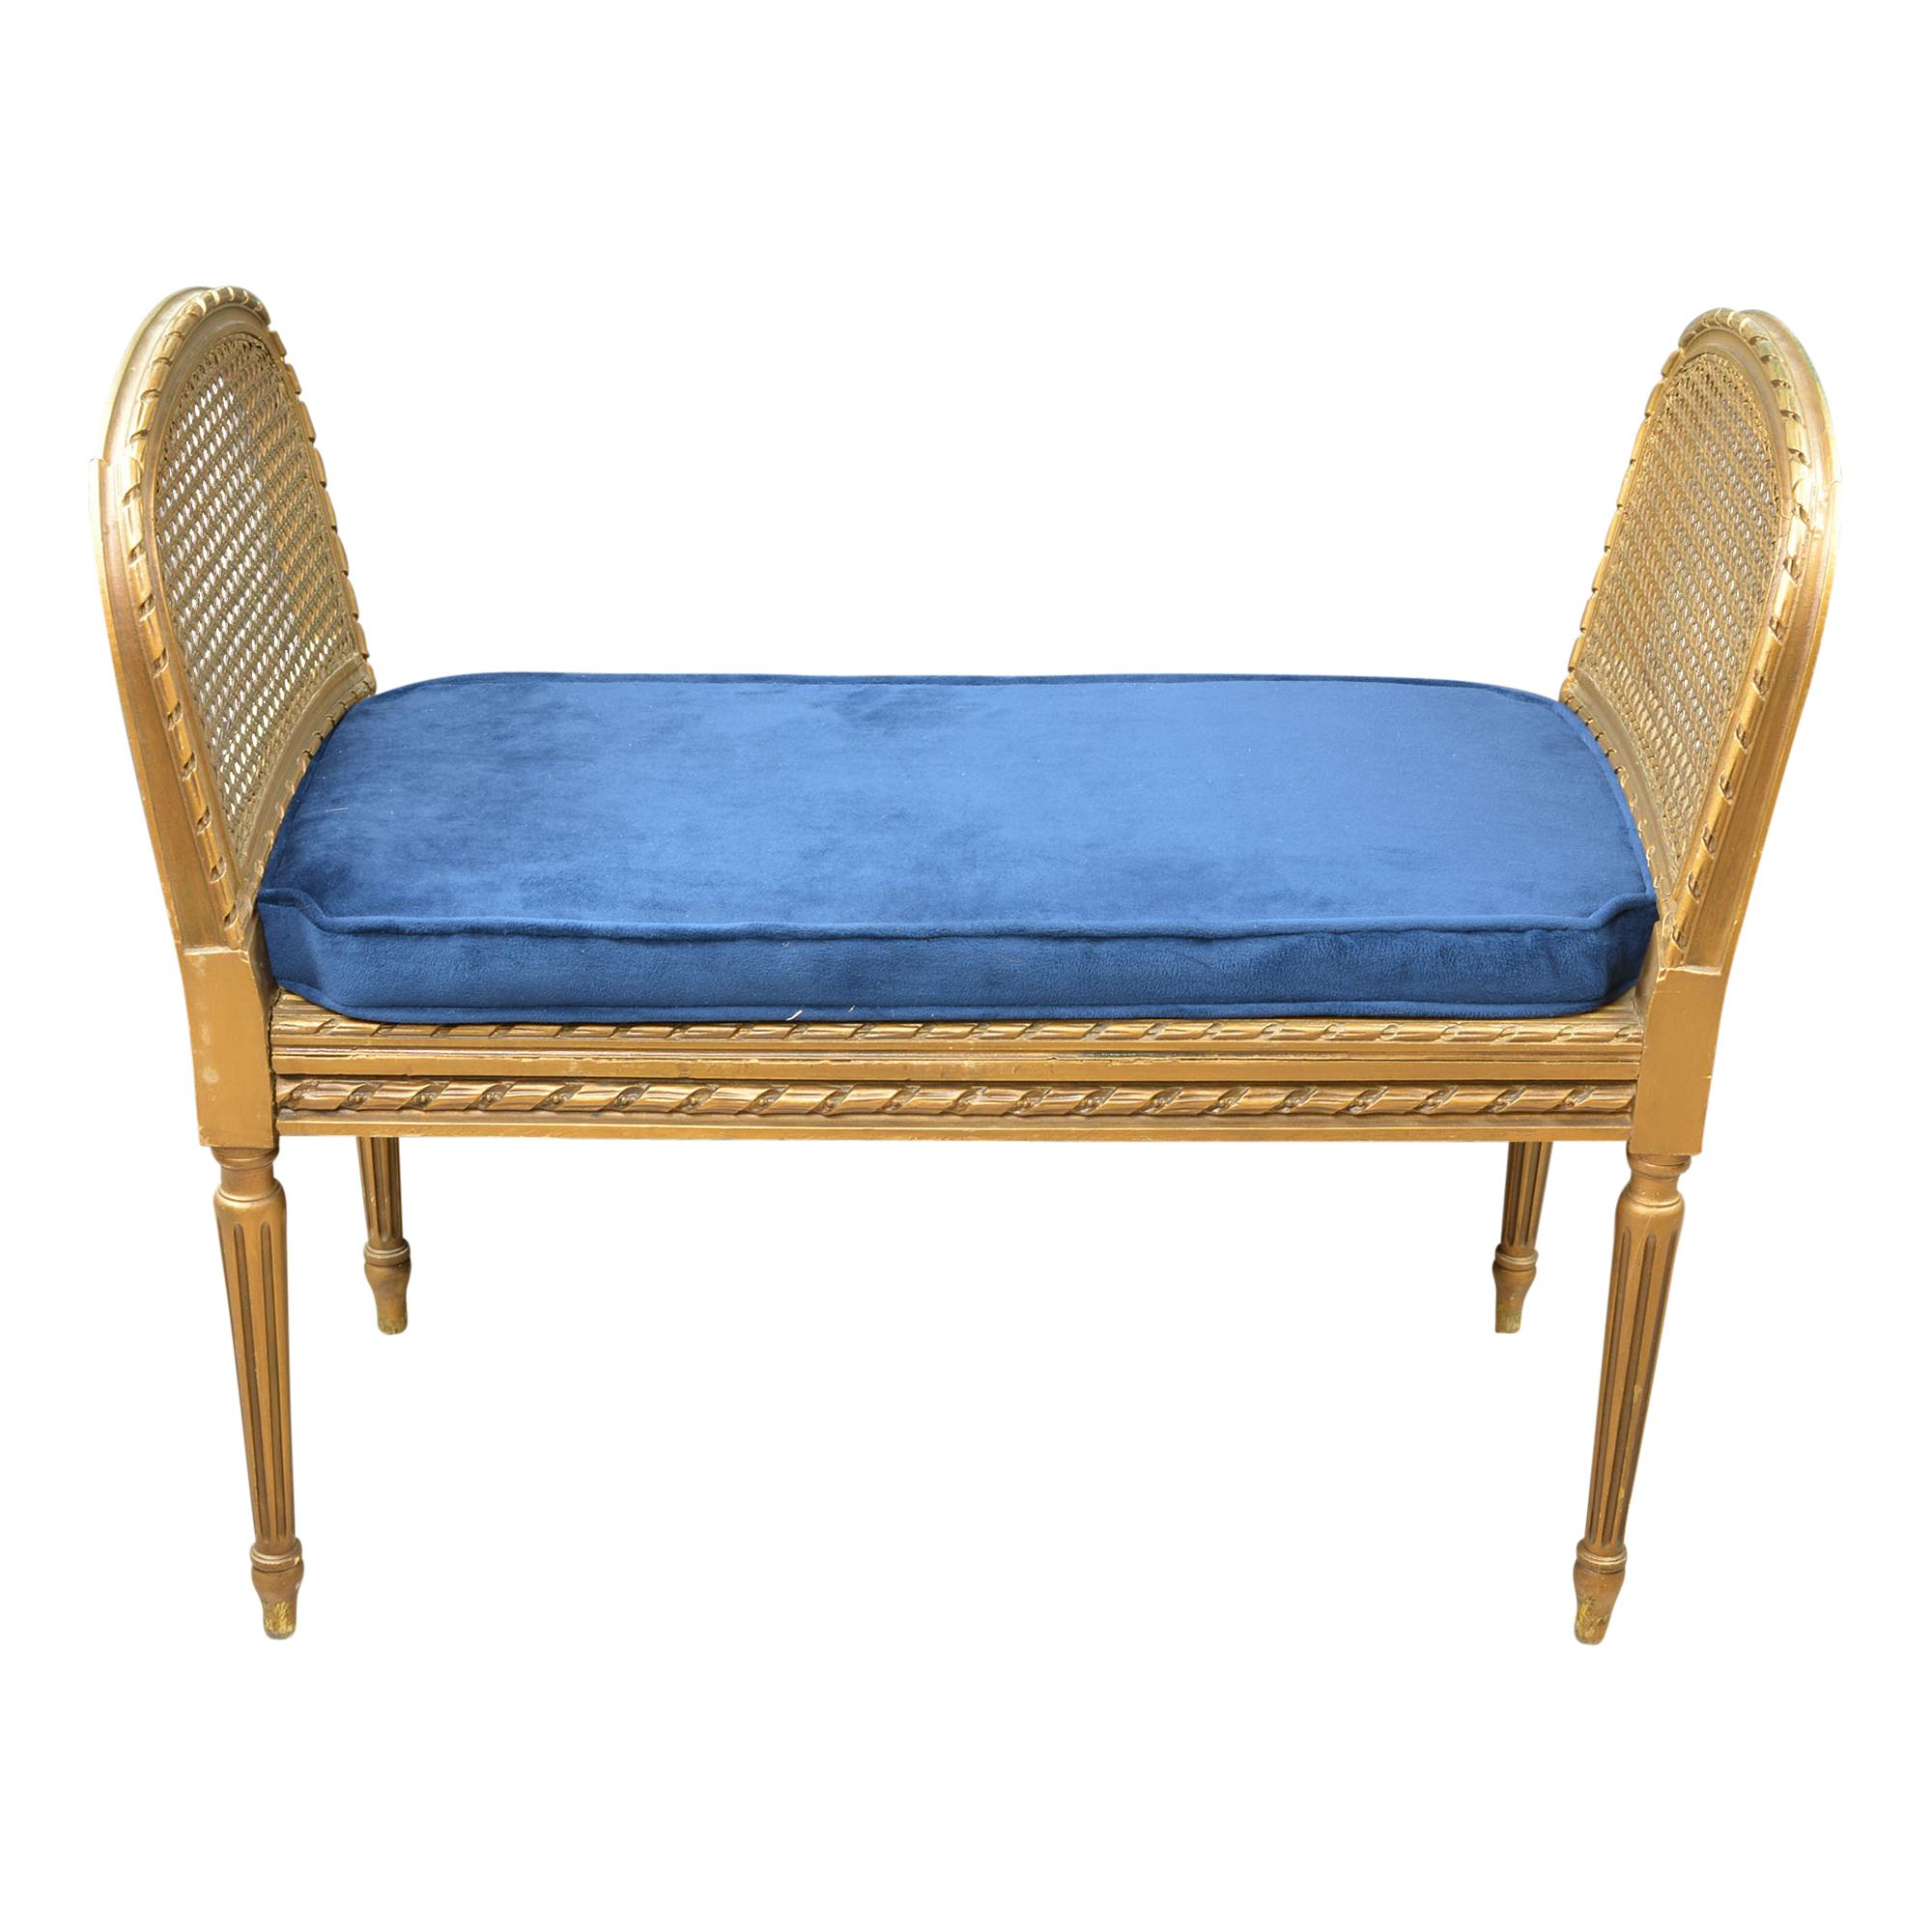 Antique Giltwood Caned Seat Raised Sides Bench Blue Velvet Cushion In Good Condition For Sale In Pataskala, OH